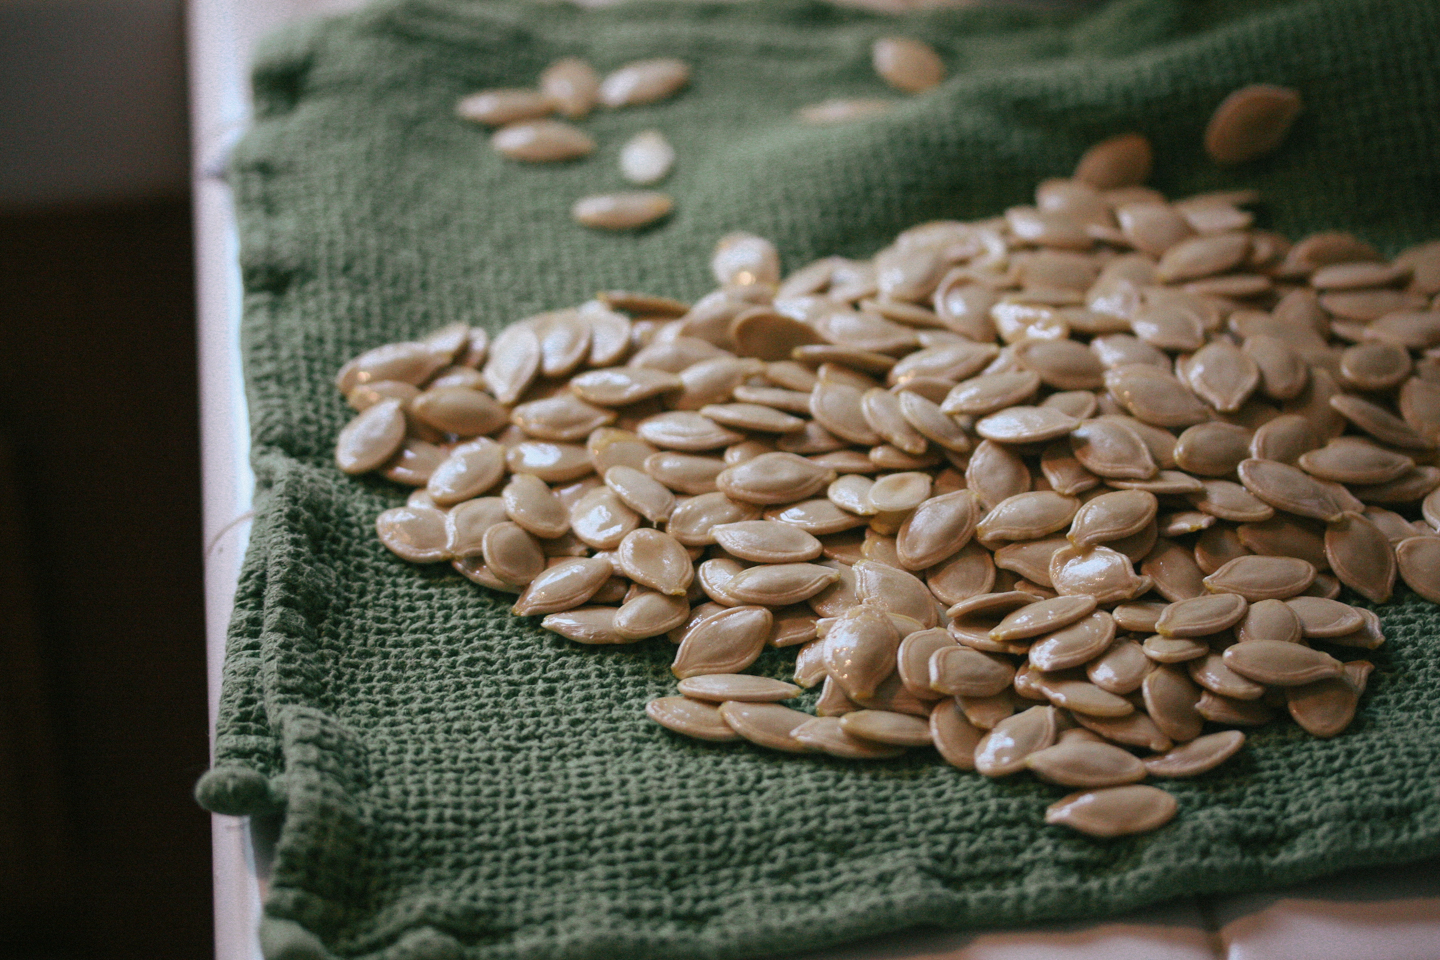 Drying the seeds